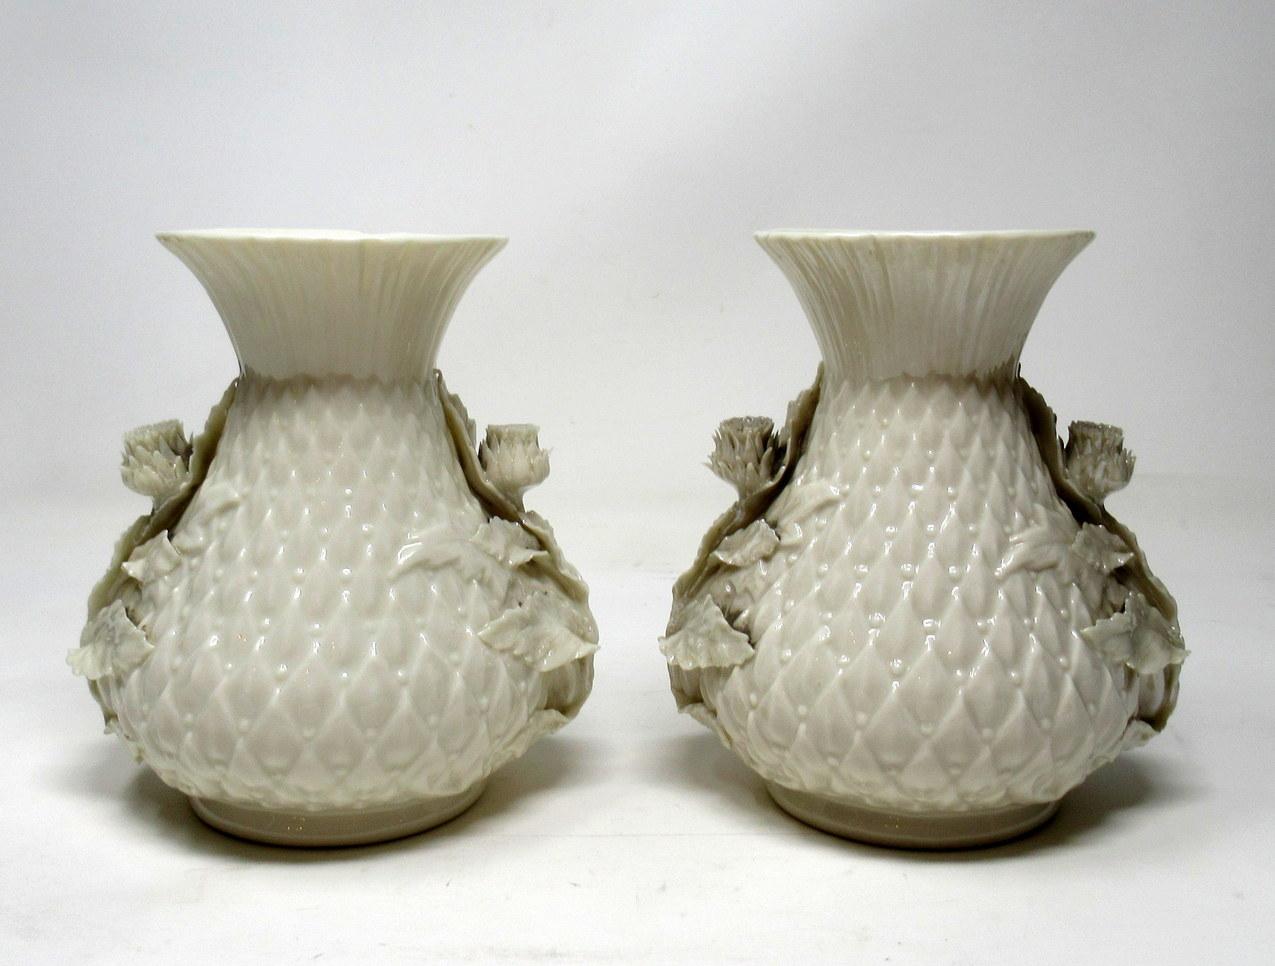 Stylish pair of Irish Belleek porcelain thistle vases of compact proportions. Third black mark for dates 1926-1946.

Each leaf molded body of bulbous outline with applied thistle bud flowers in high relief. The tall slender flared openings with